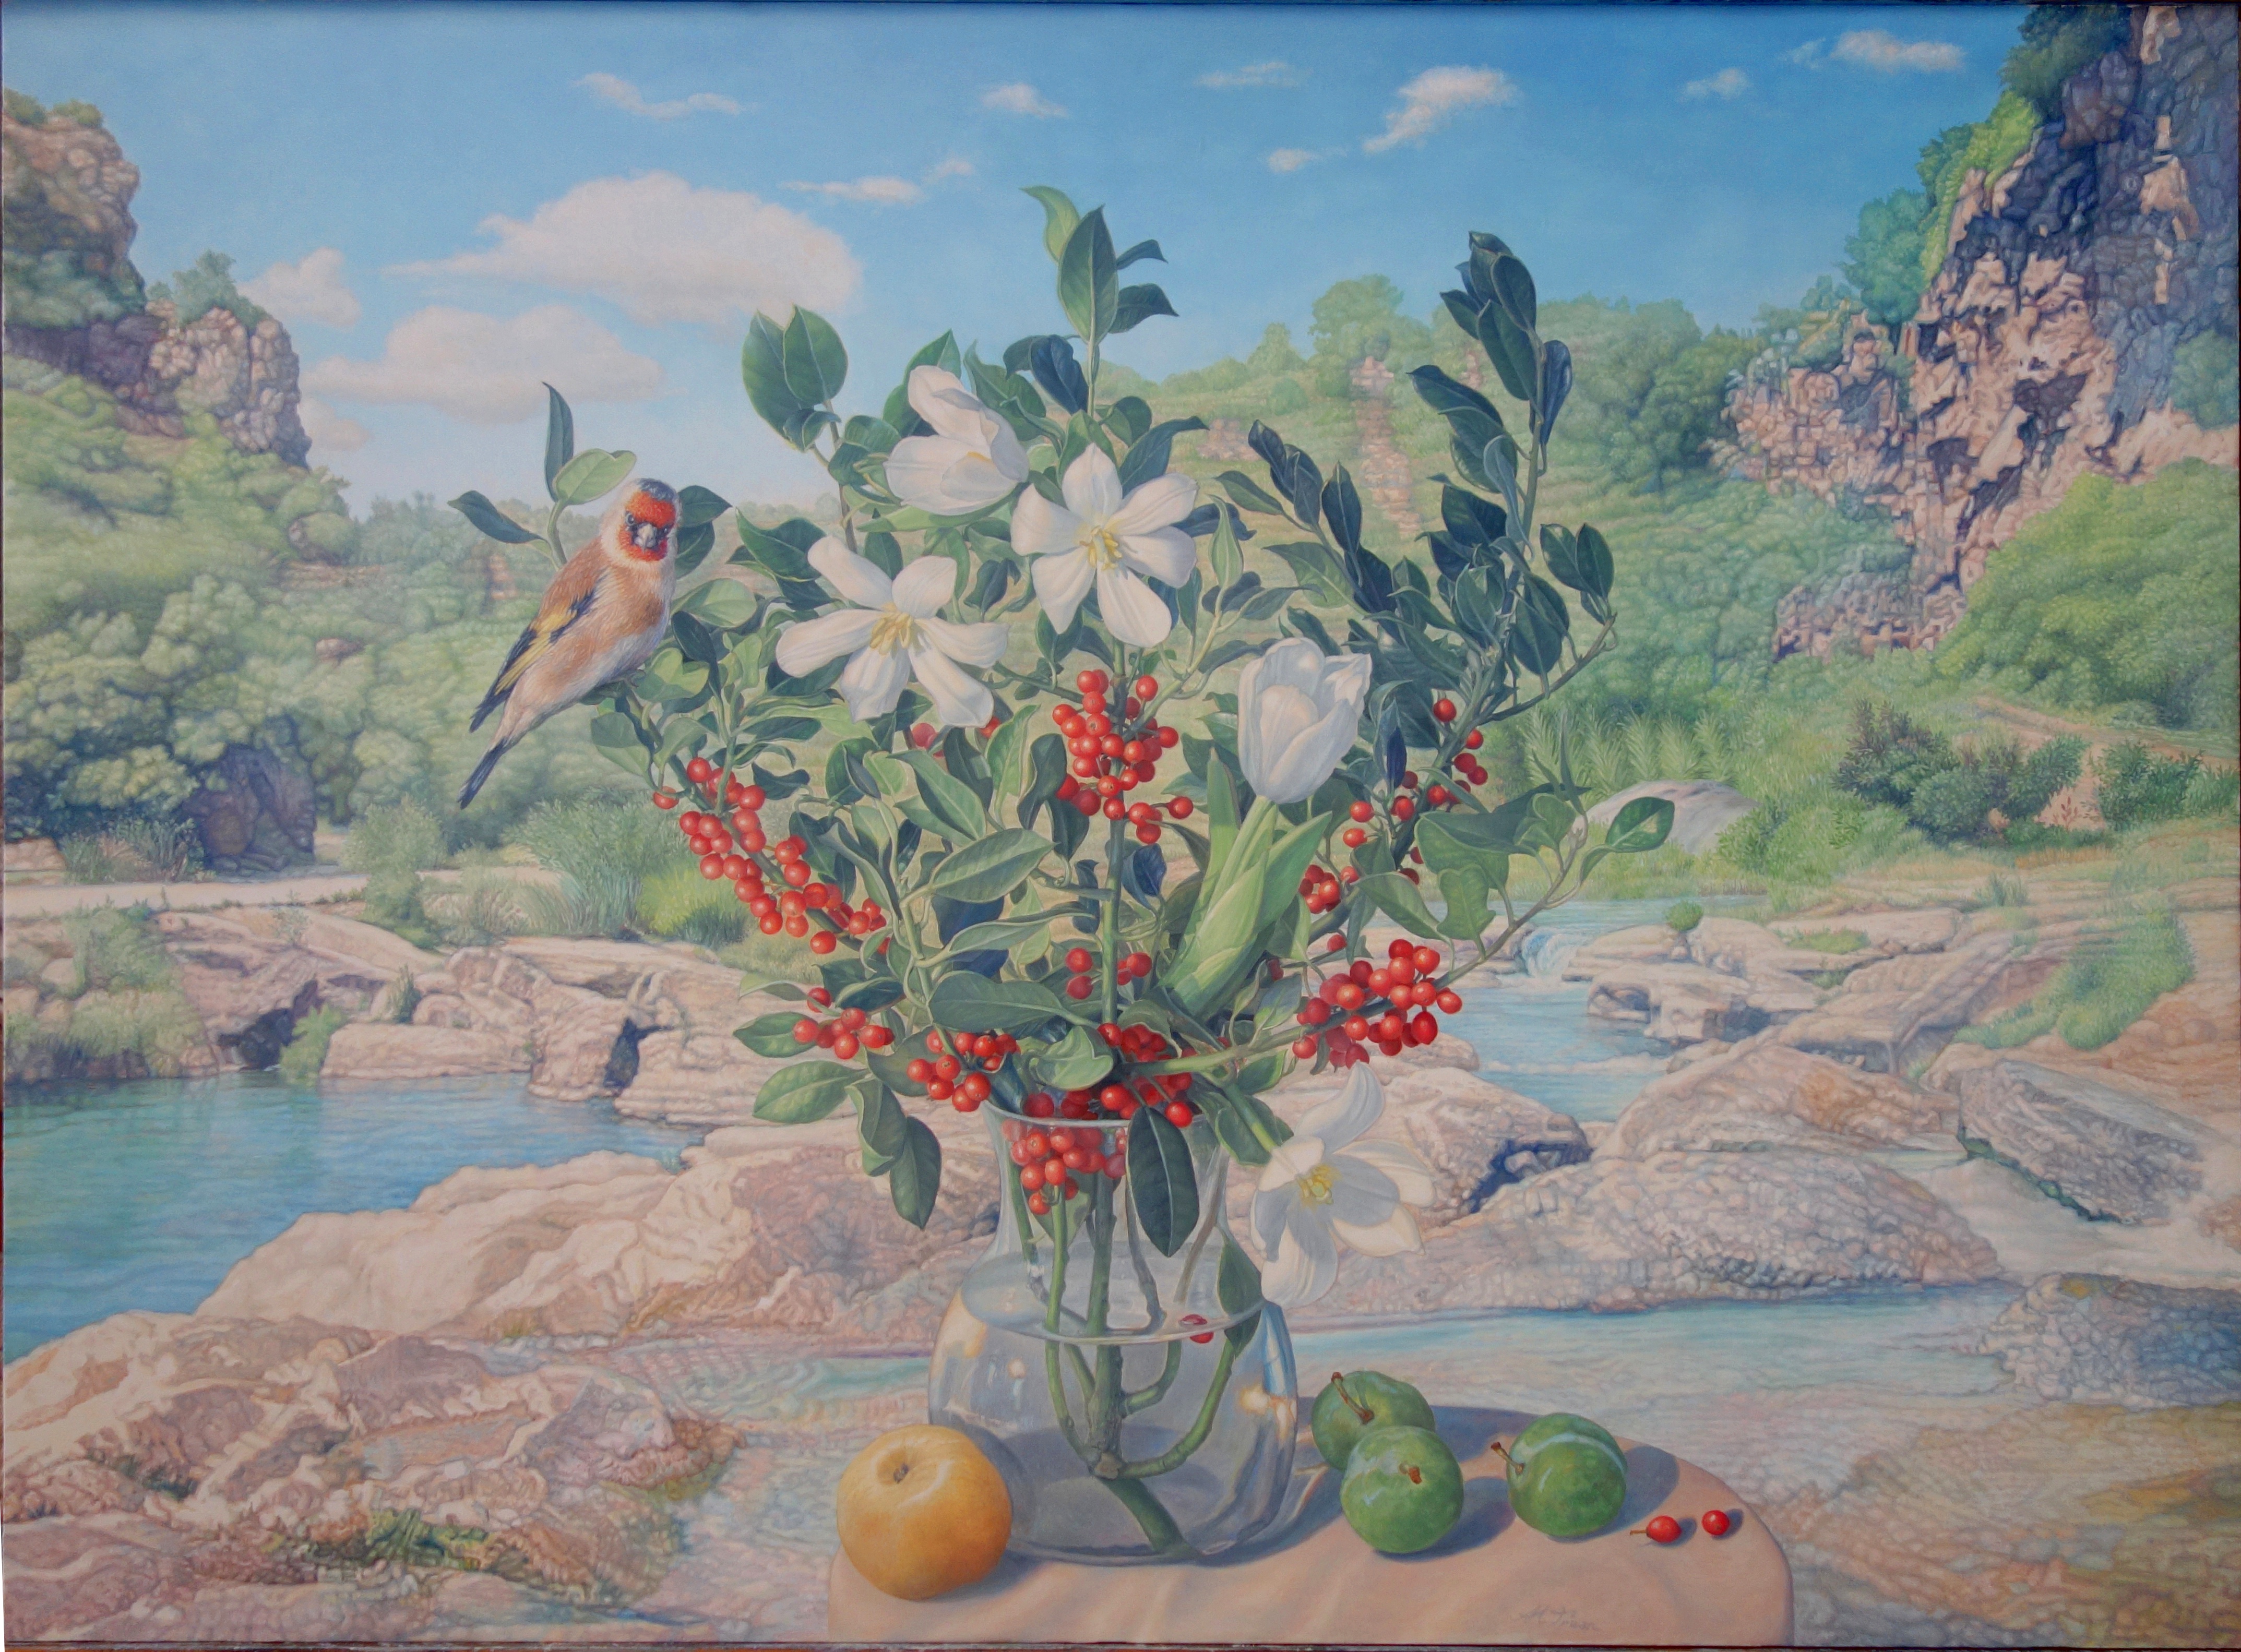 Tulips and ardisias in the river,2016 | oil on canvas, 28.7x39.3in.